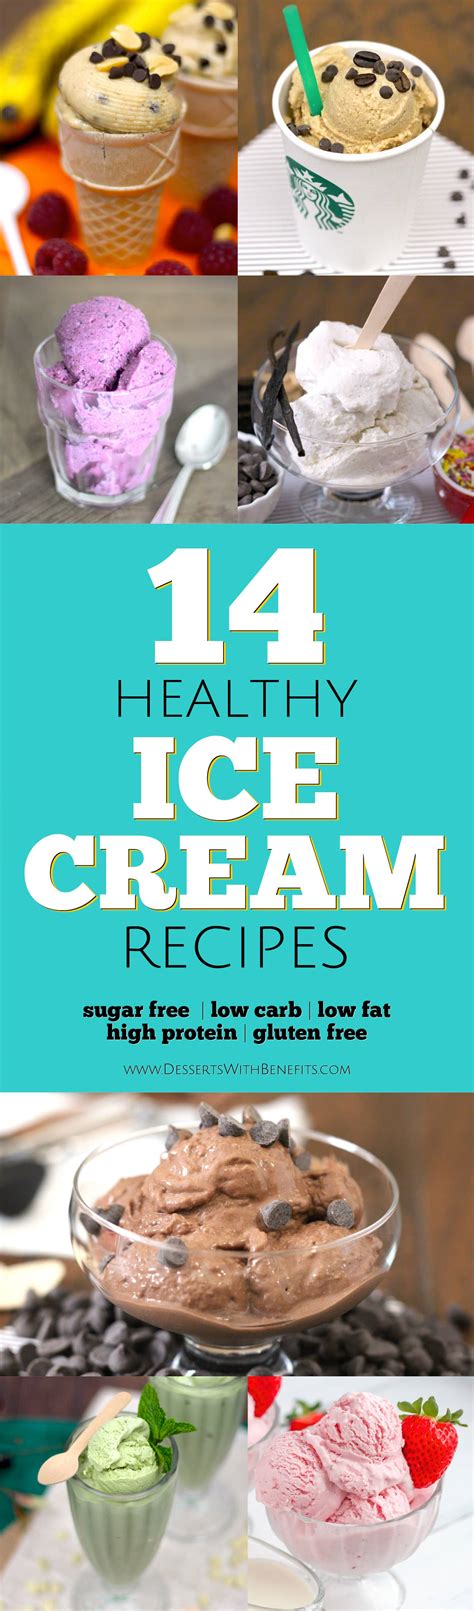 Healthy Ice Cream Recipes Sugar Free Low Carb Low Fat High Protein